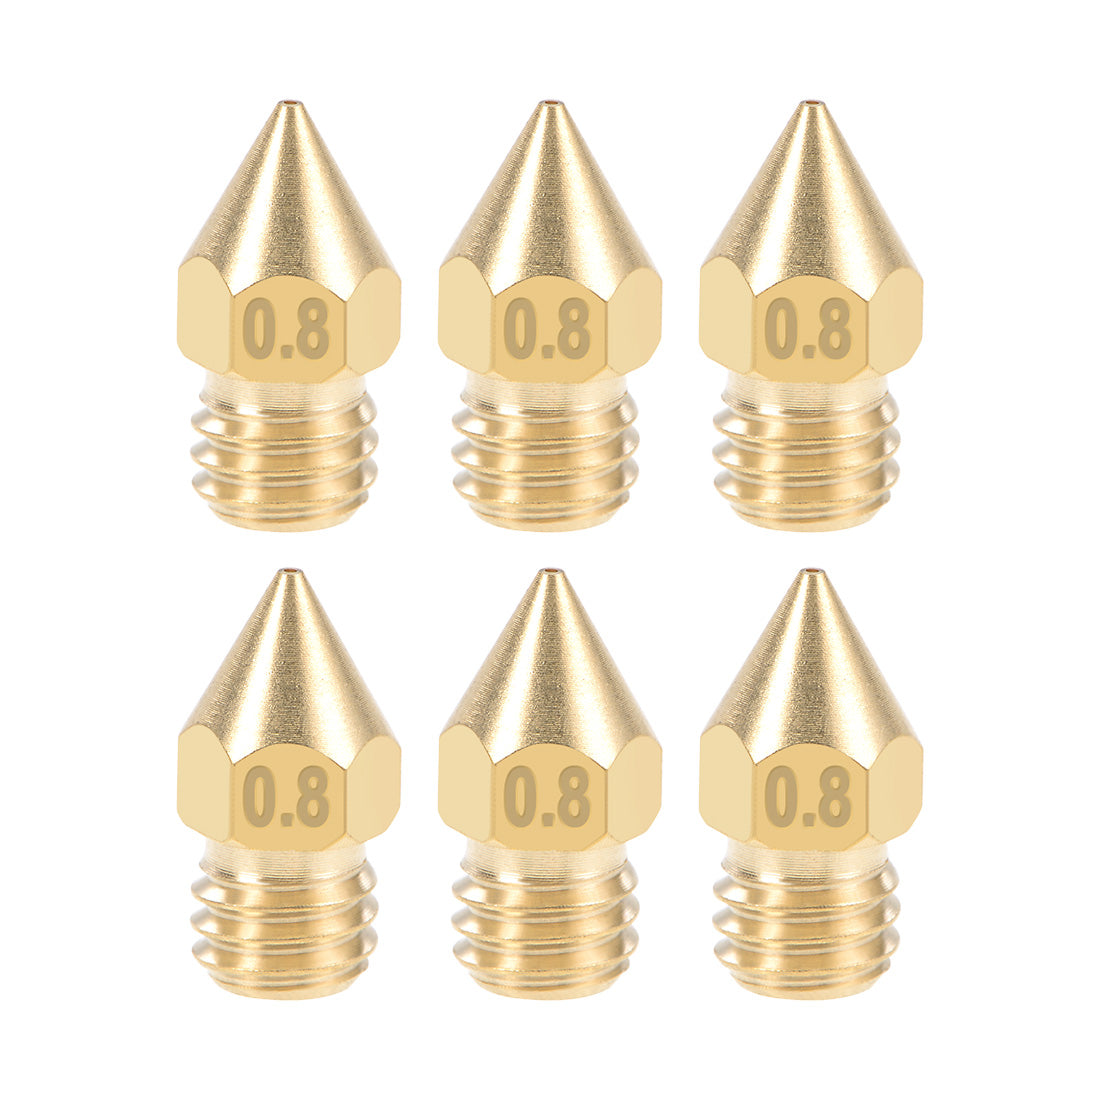 uxcell Uxcell 0.8mm 3D Printer Nozzle Head M6 for MK8 1.75mm Extruder Print, Brass 6pcs